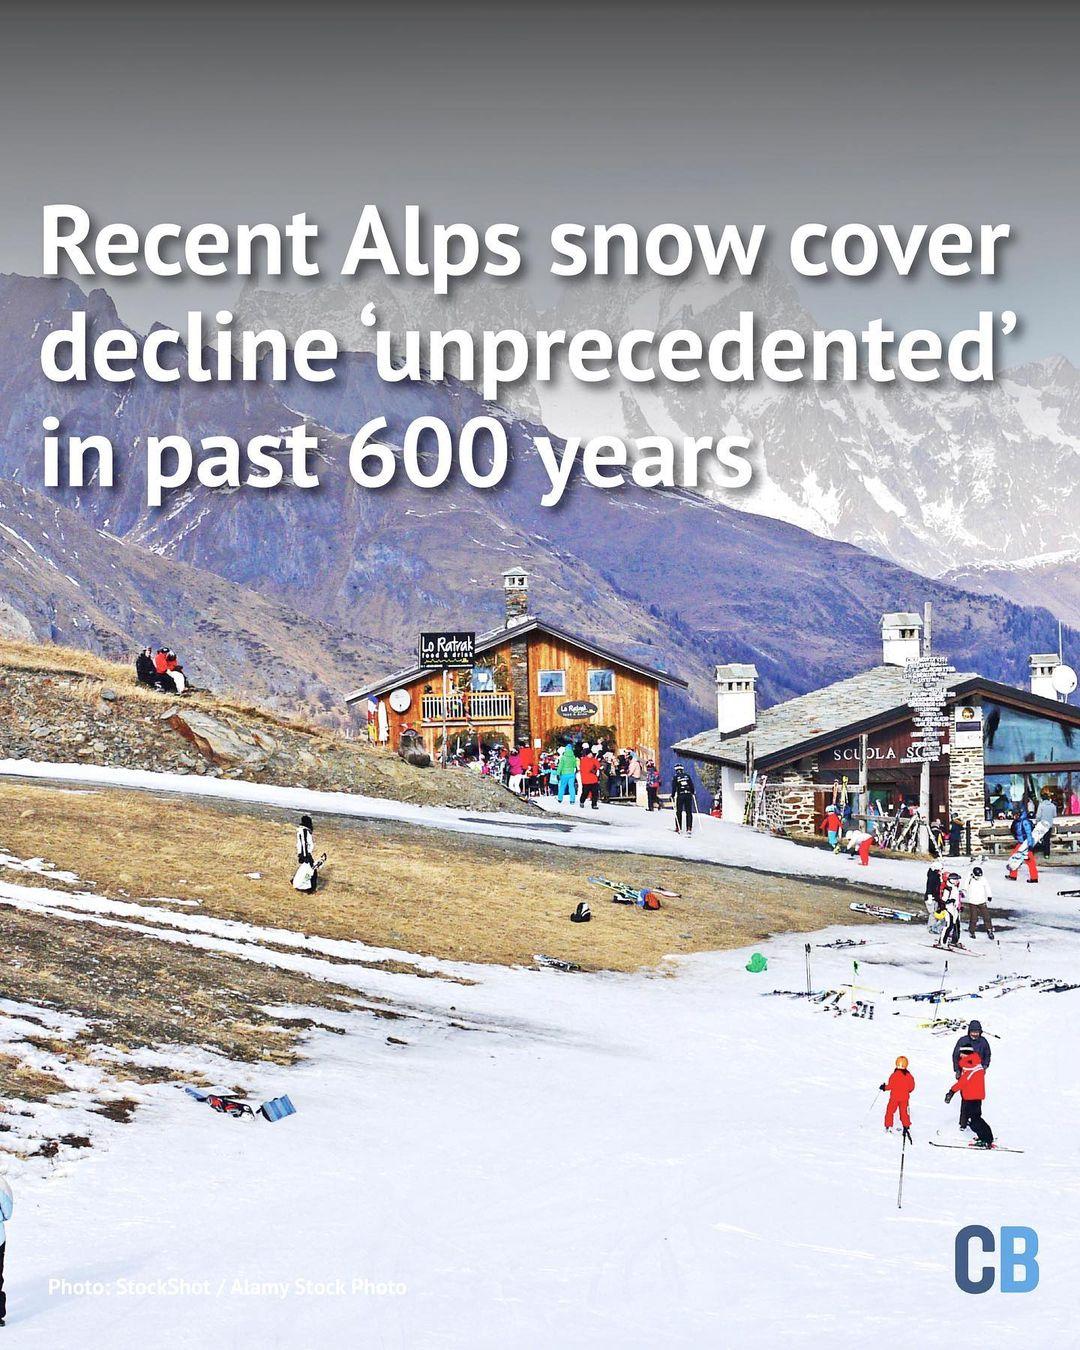 class="content__text"
                        ⛰️ The duration of snow cover in the Alps is now 36 days shorter than the long-term average – an “unprecedented” decline over the past 600 years – according to recent research.

🚰 The Alps are Europe’s largest mountain range, stretching from France to Slovenia. They provide as much as 90% of the water to lowland Europe, earning them the moniker “the water towers of Europe”.

⛷️ The Alps are also one of the most popular tourism destinations in the world, attracting 120m visitors every year for activities including skiing, snowboarding, hiking and cycling.

🐐 The lack of winter snow has made international news in recent years, including in 2023 when Alpine resorts were driven to bring in snow by helicopter and offer “alternative entertainment” – such as “hiking with goats” – the New York Times reported.

📲 Link in bio

Photo: StockShot / Alamy Stock Photo

 #alps #skiing #snow #wintersports #snowsports #climatechange #water 
 